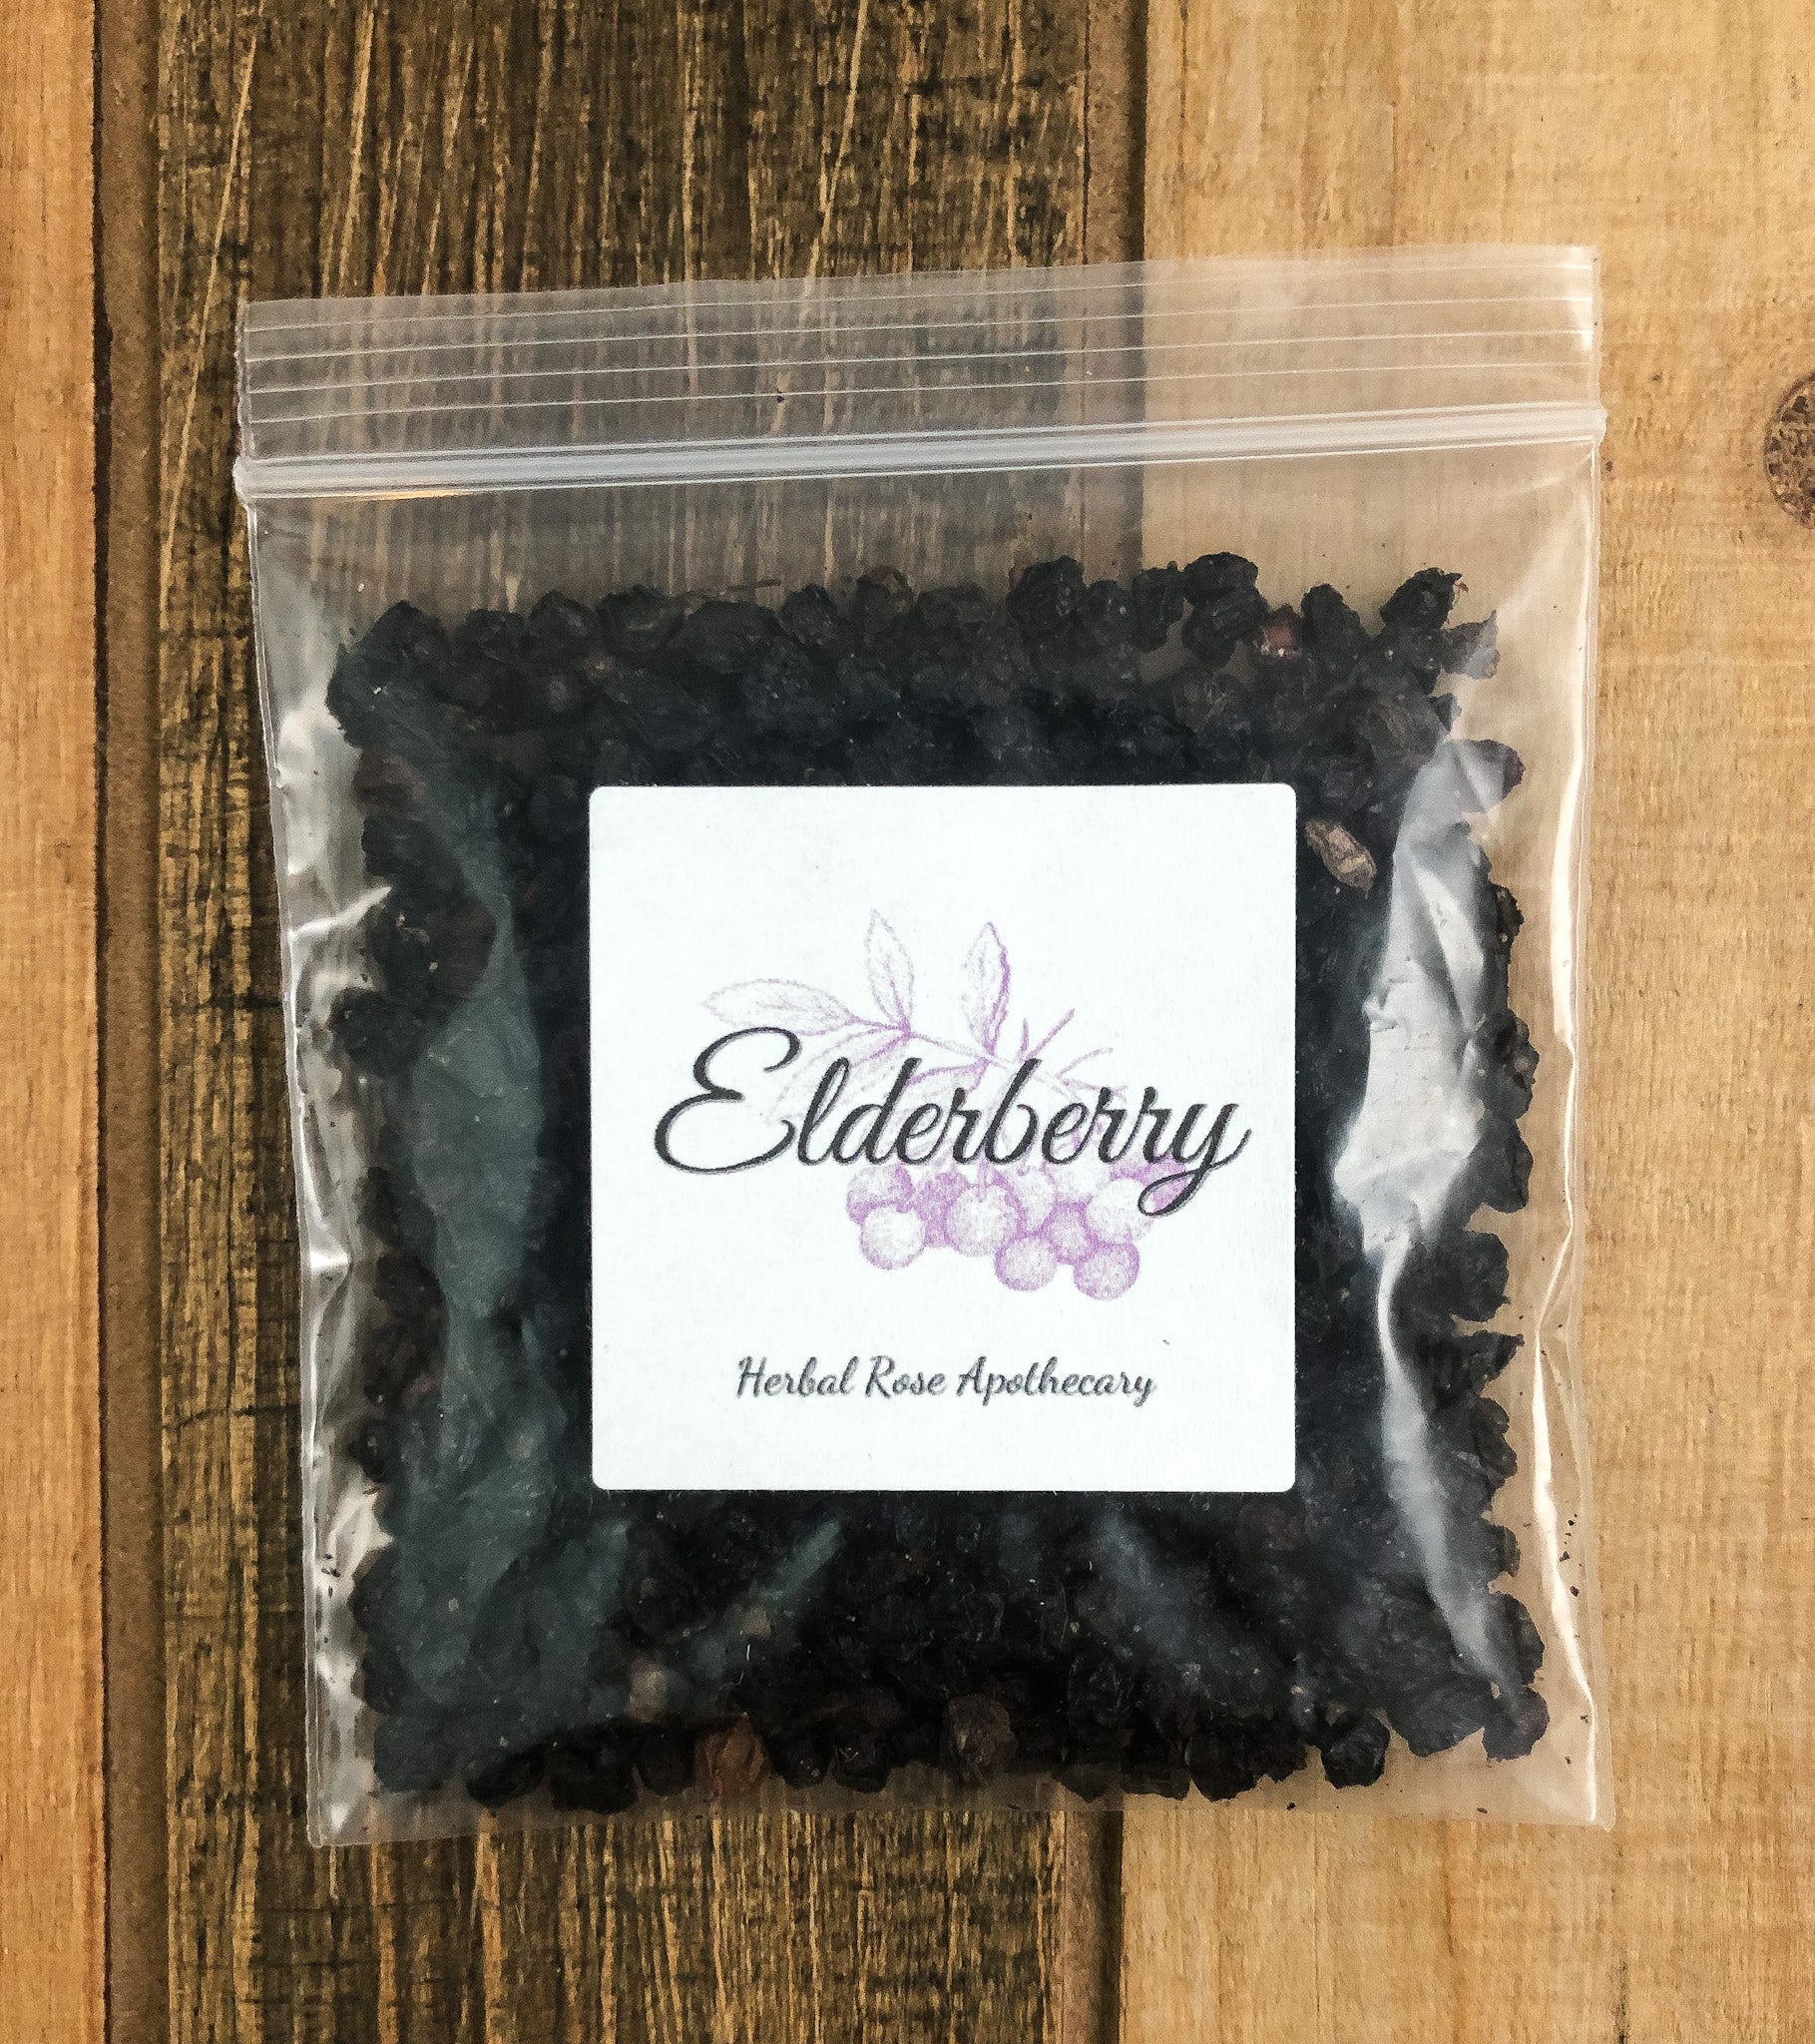 8g bag of dried elderberry in a clear plastic bag with a wooden background